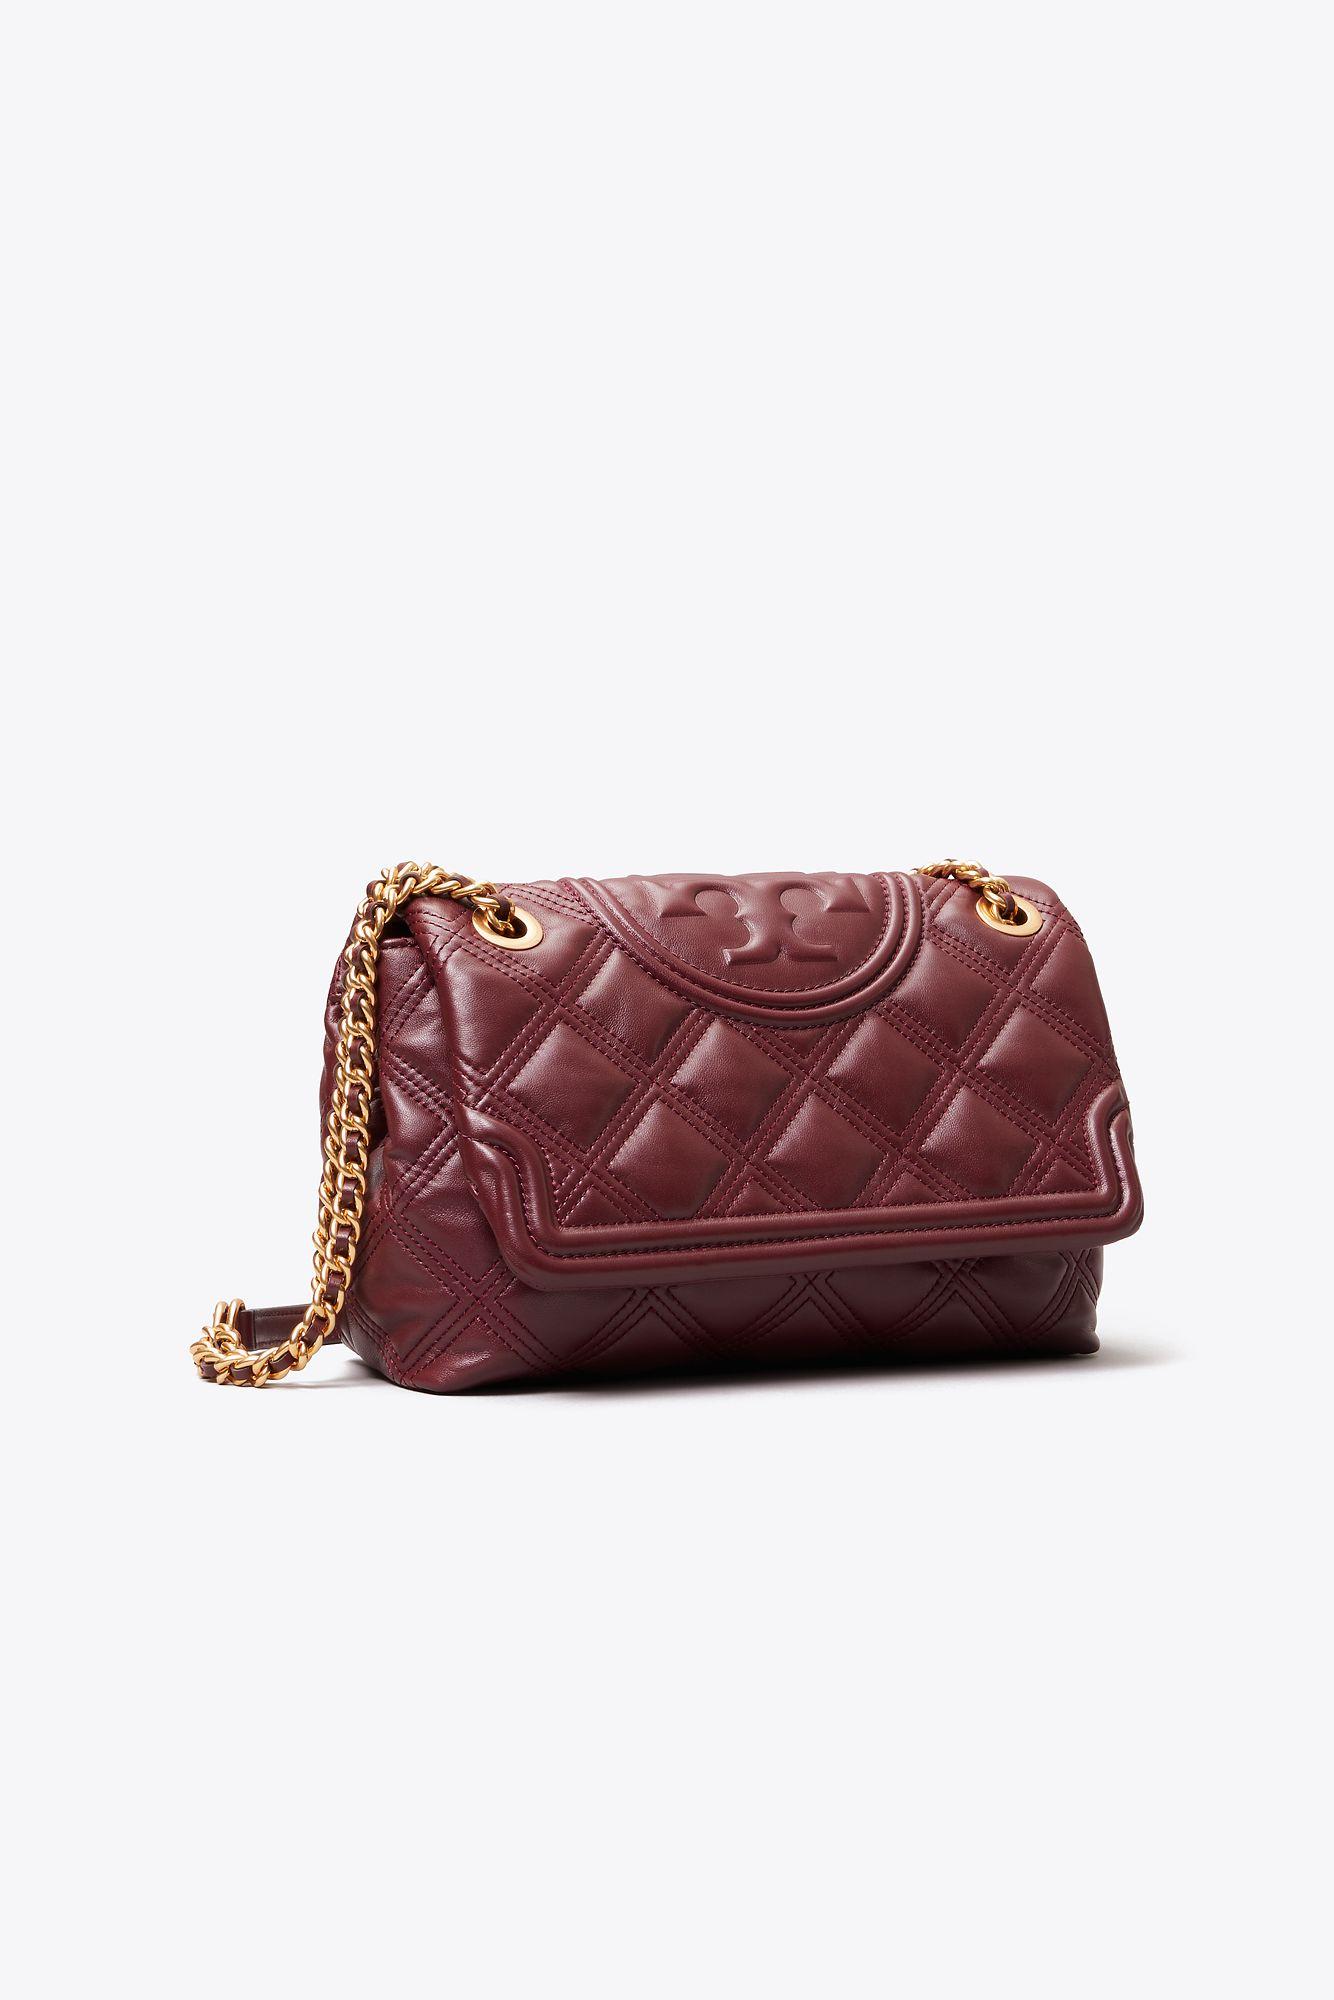 Tory Burch Fleming Soft Convertible Shoulder Bag In Burgundy Quilted  Calfskin in Claret (Red) | Lyst